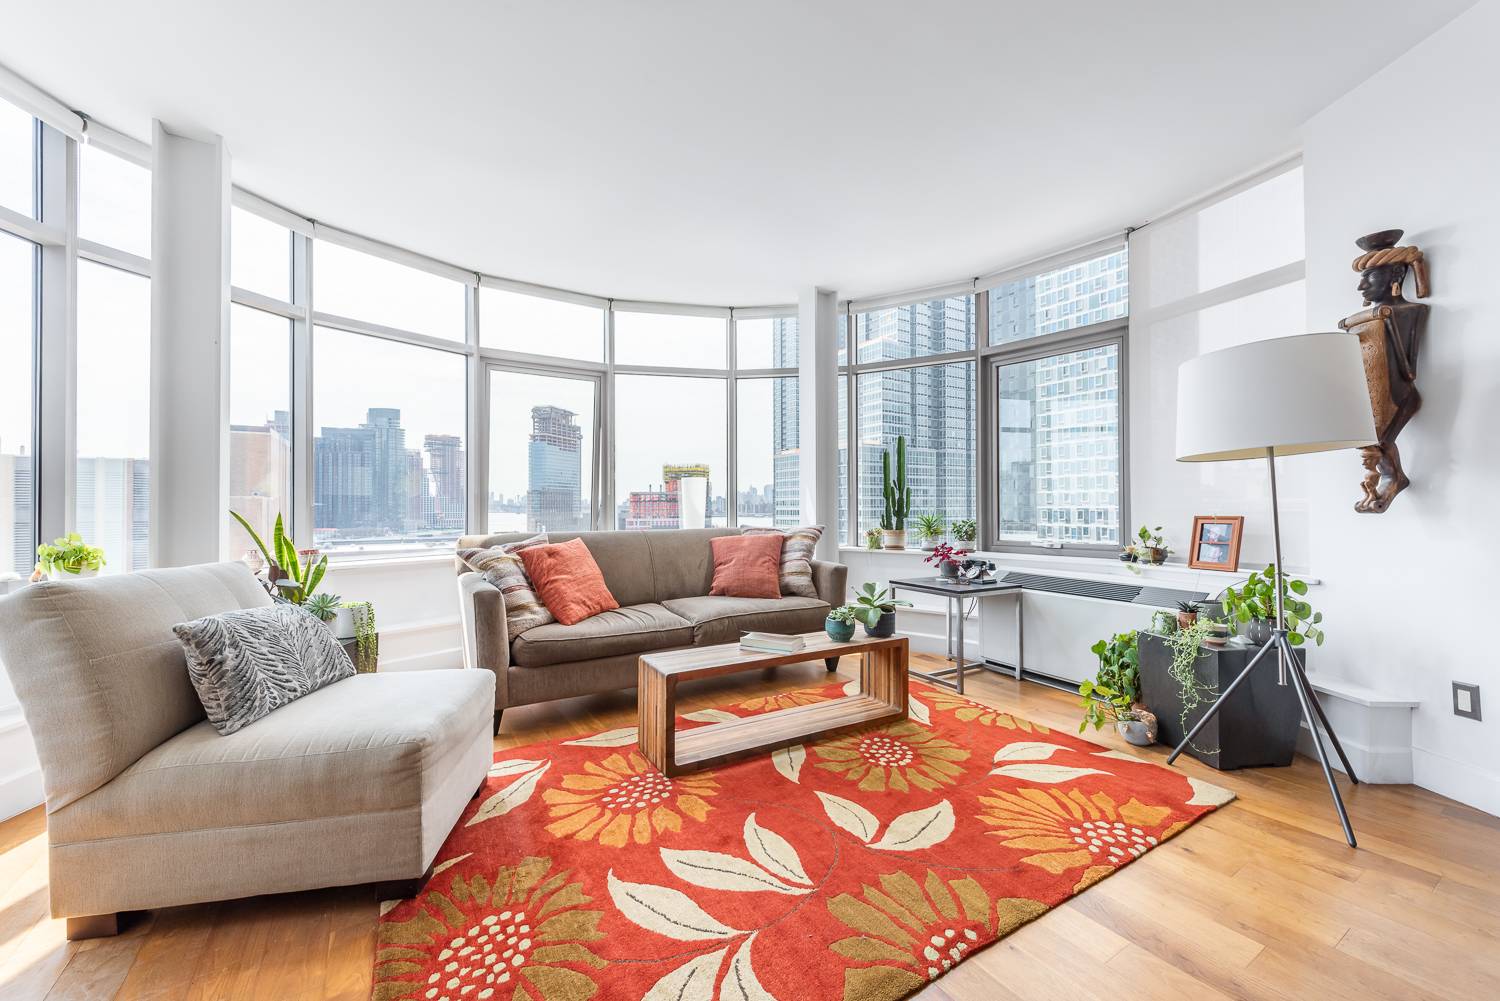 EXQUISITE MANHATTAN VIEWS from ROTUNDA GREAT ROOM in 2BR 2BA at POWERHOUSE near WATERFRONTLuxuriate in this outstanding 2BR 2BA designer's dream condo rental comprised of 1, 473 sq.